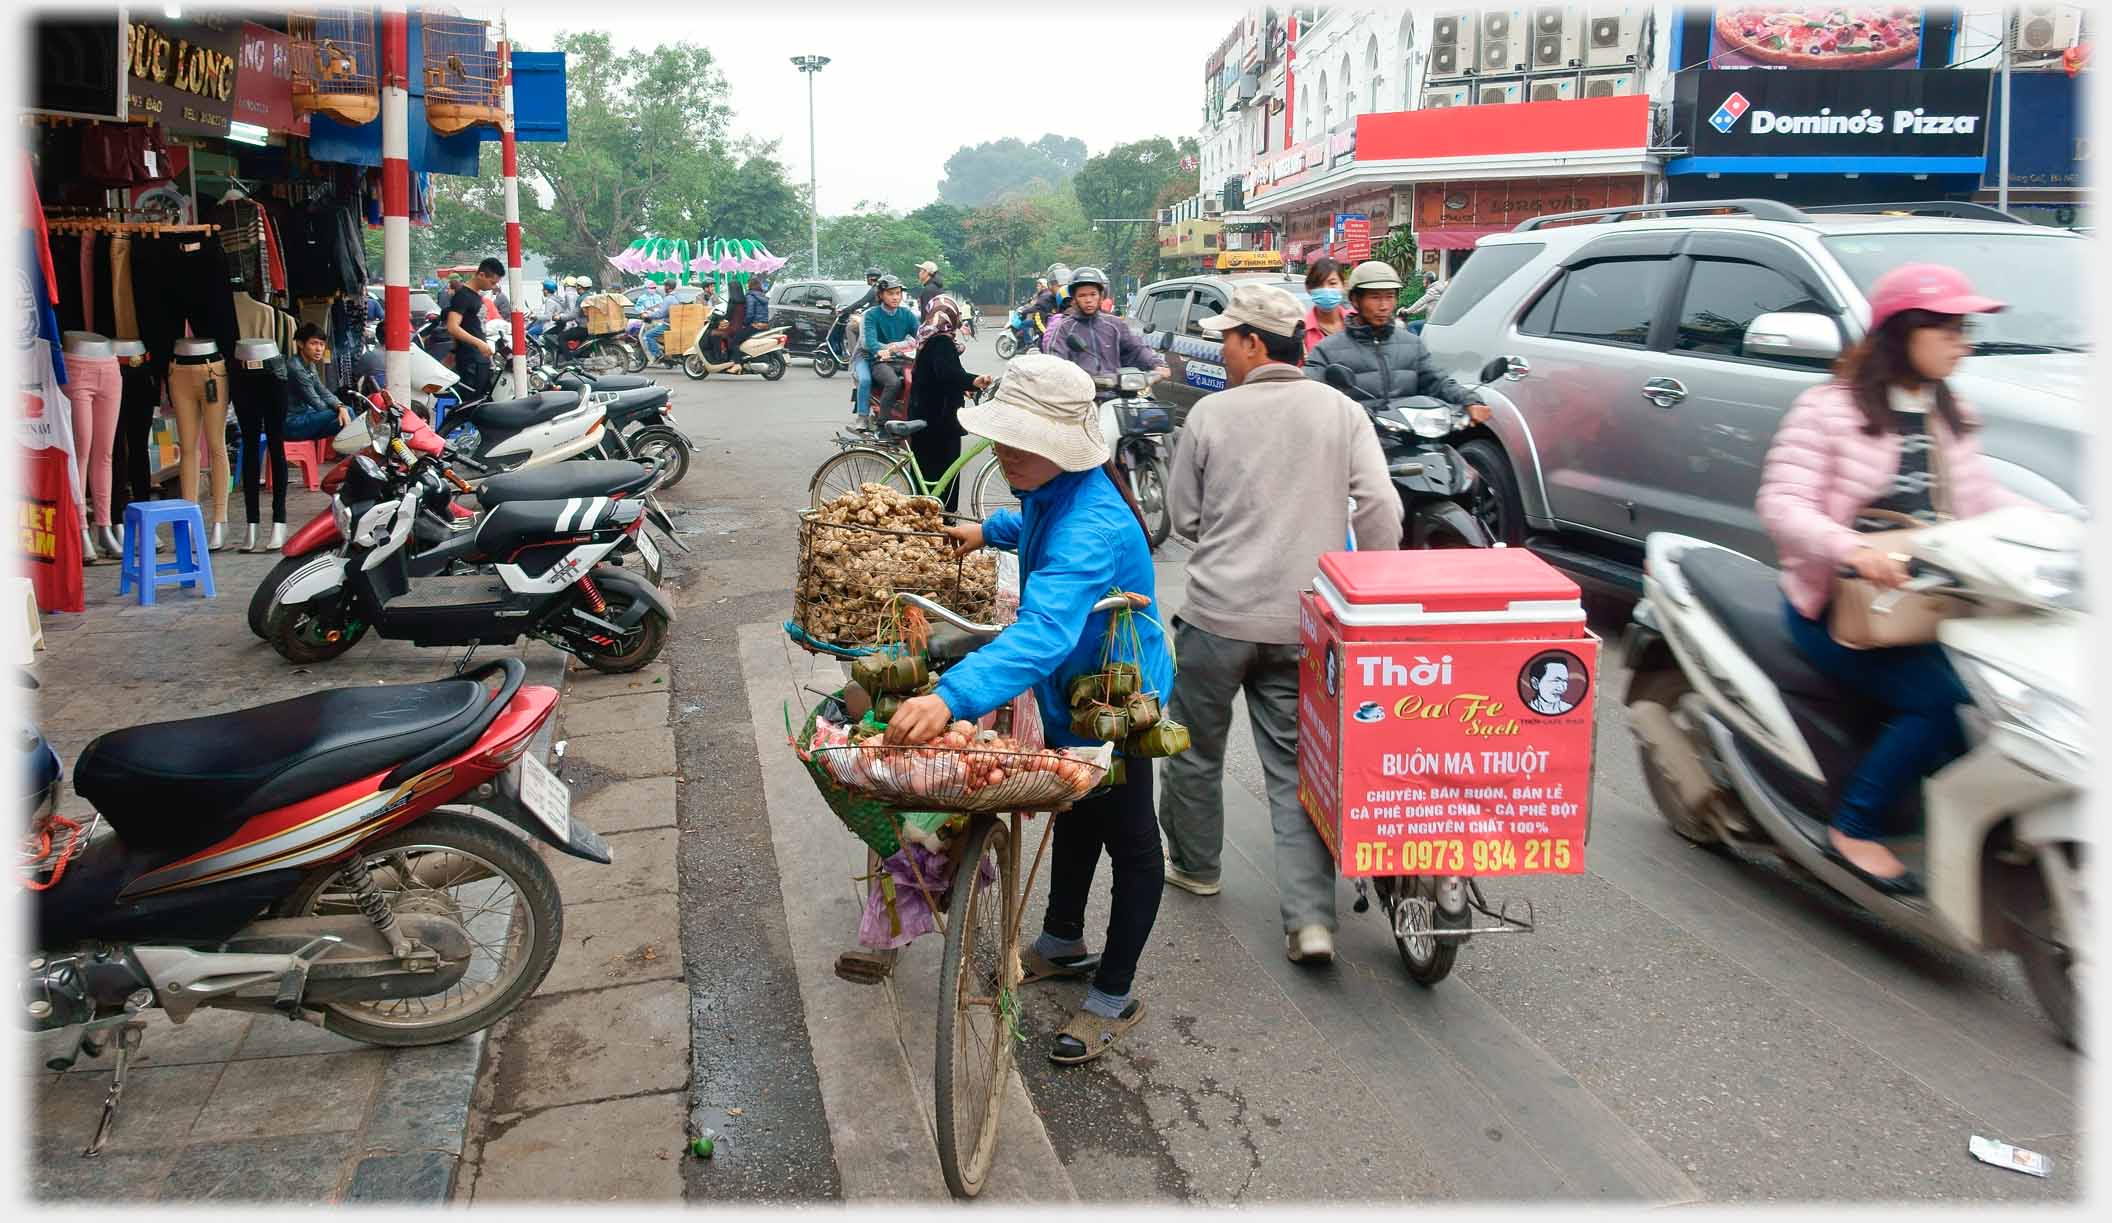 Woman with baskets of ginger and onions on a bicycle on a busy street.